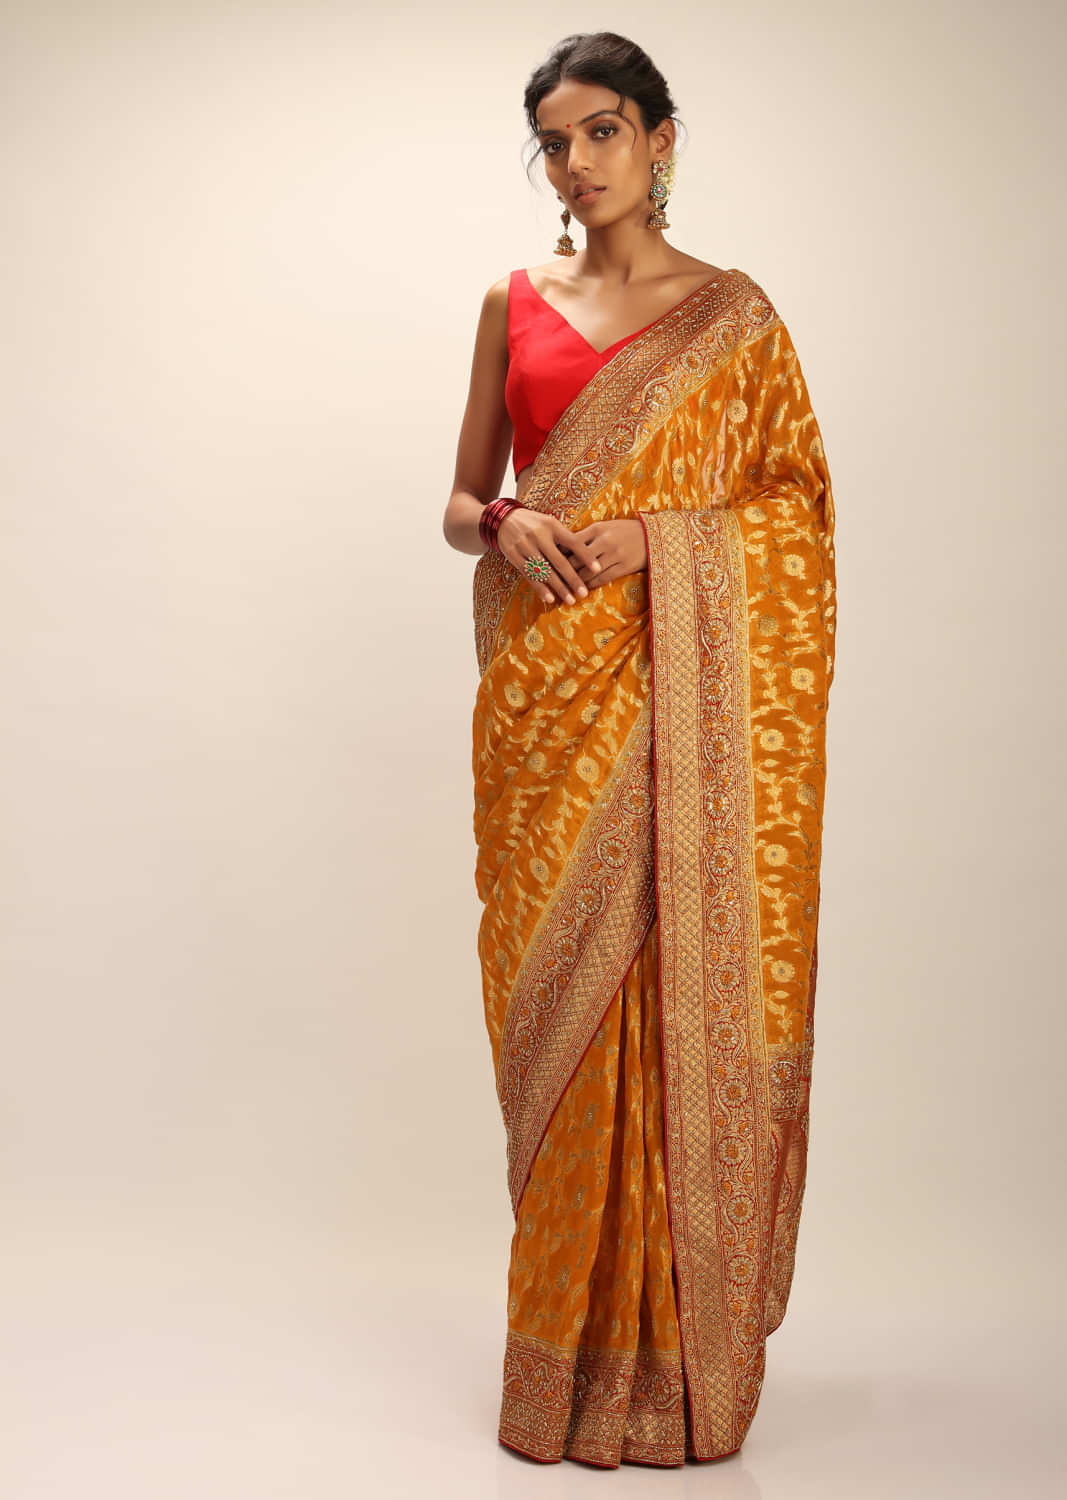 Mustard Banarasi Saree In Georgette With Woven Floral Jaal And Zardosi Embroidery Detailing  